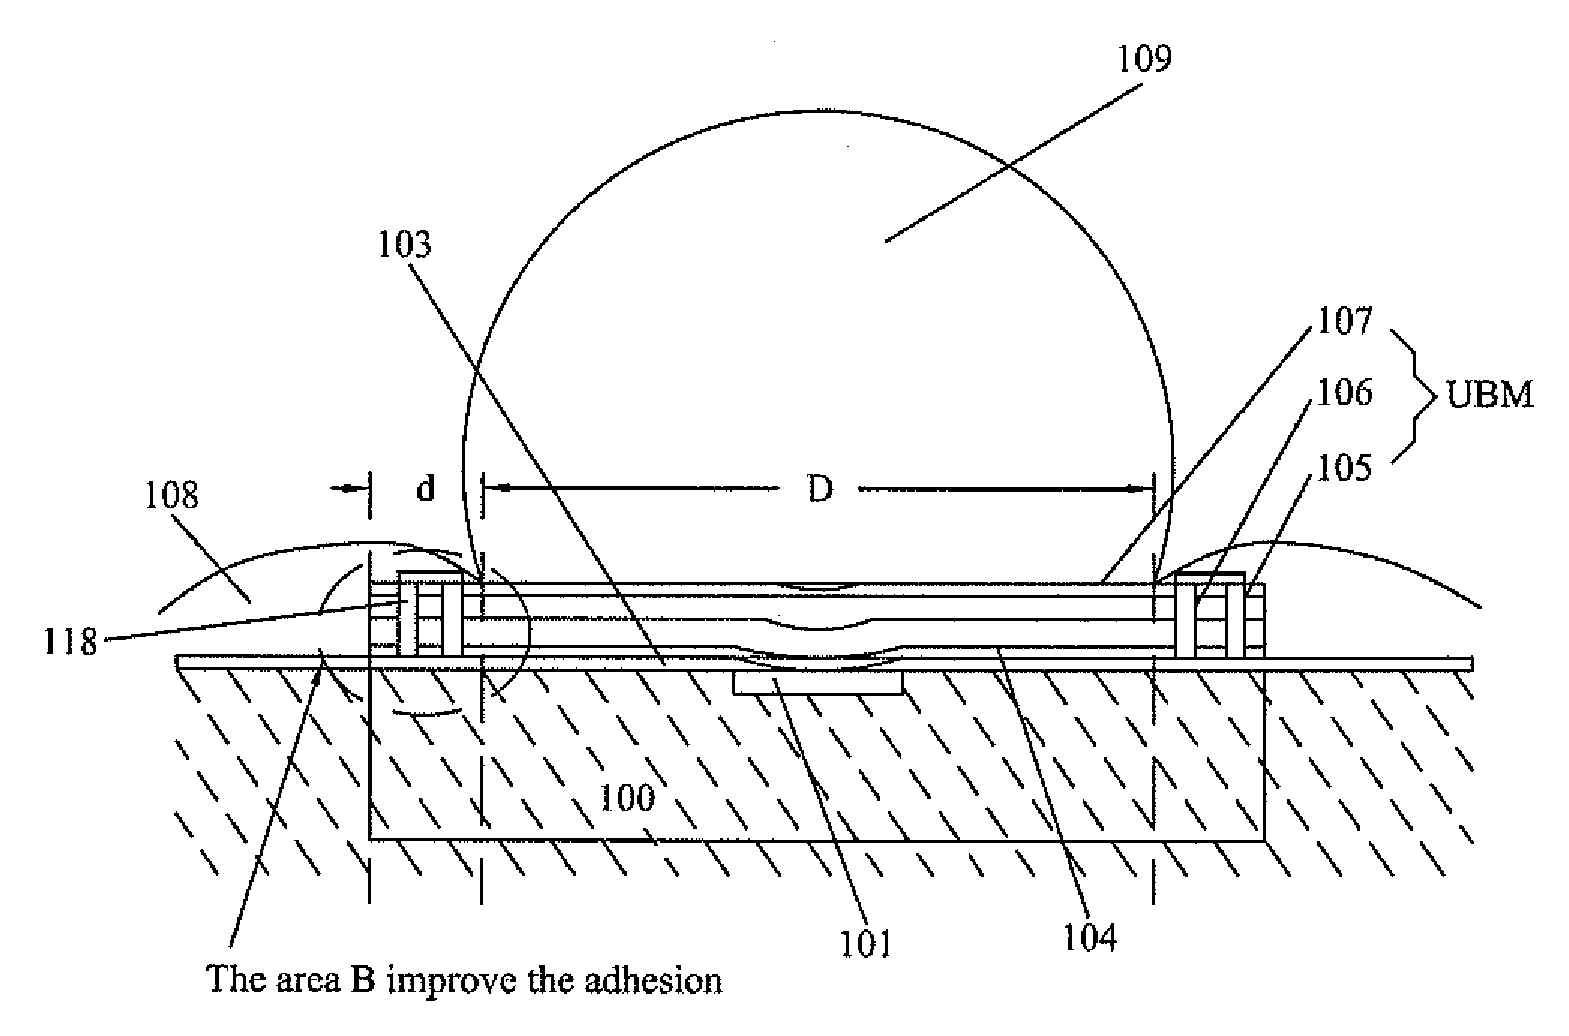 Under bump metallurgy structure of semiconductor device package